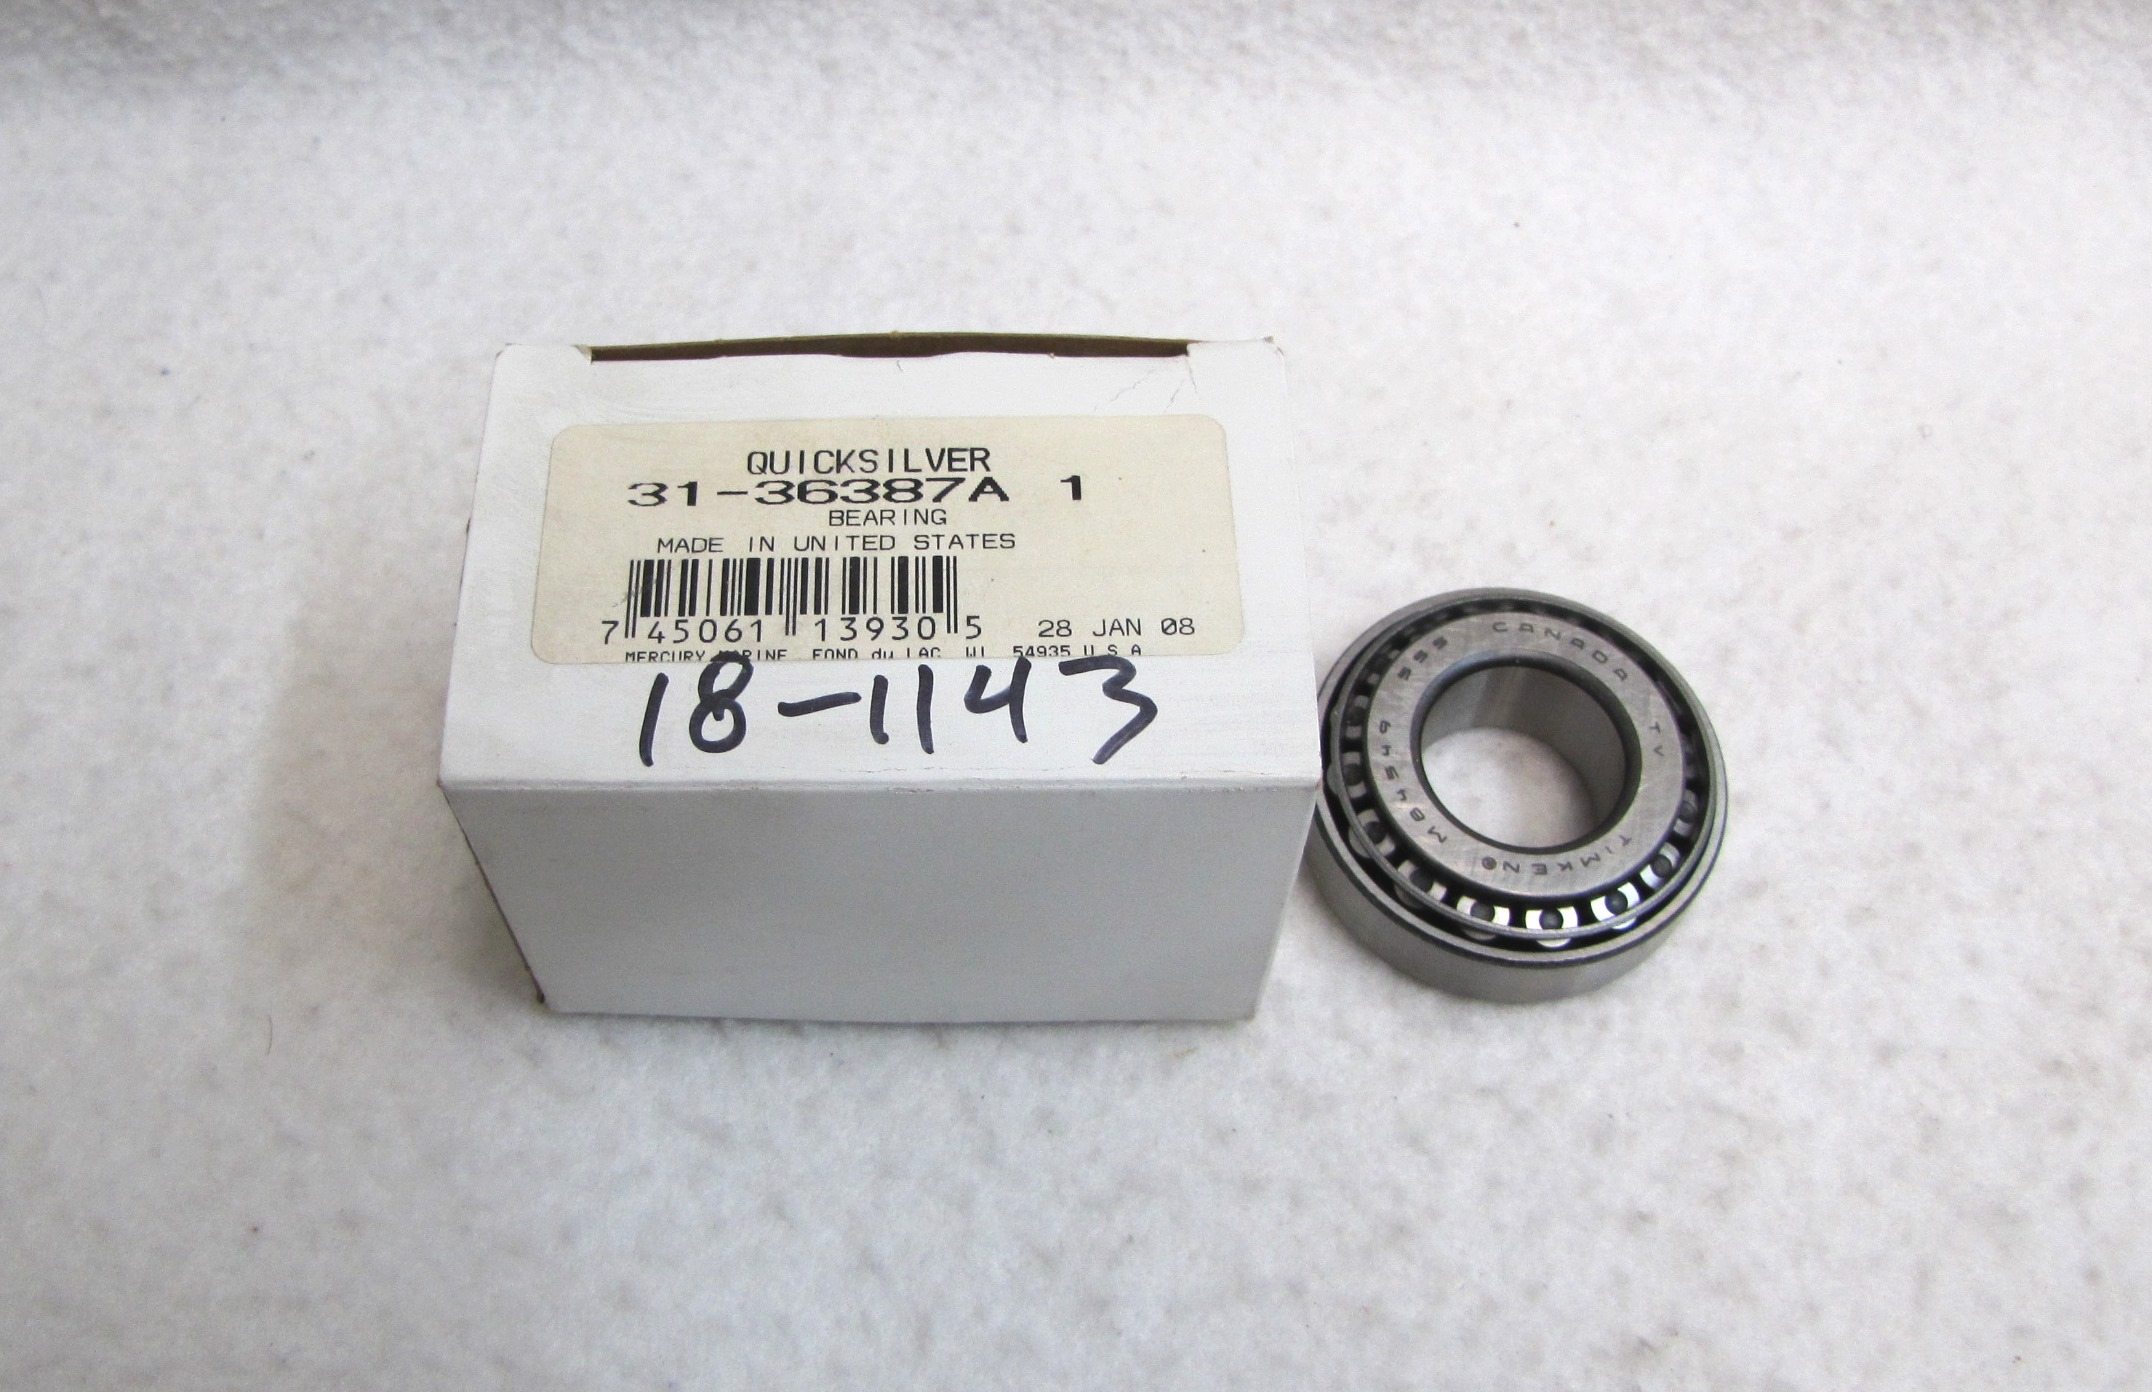 Tapered Roller Bearing Mercruiser 31-36387A1 replaces # MR & Alpha 